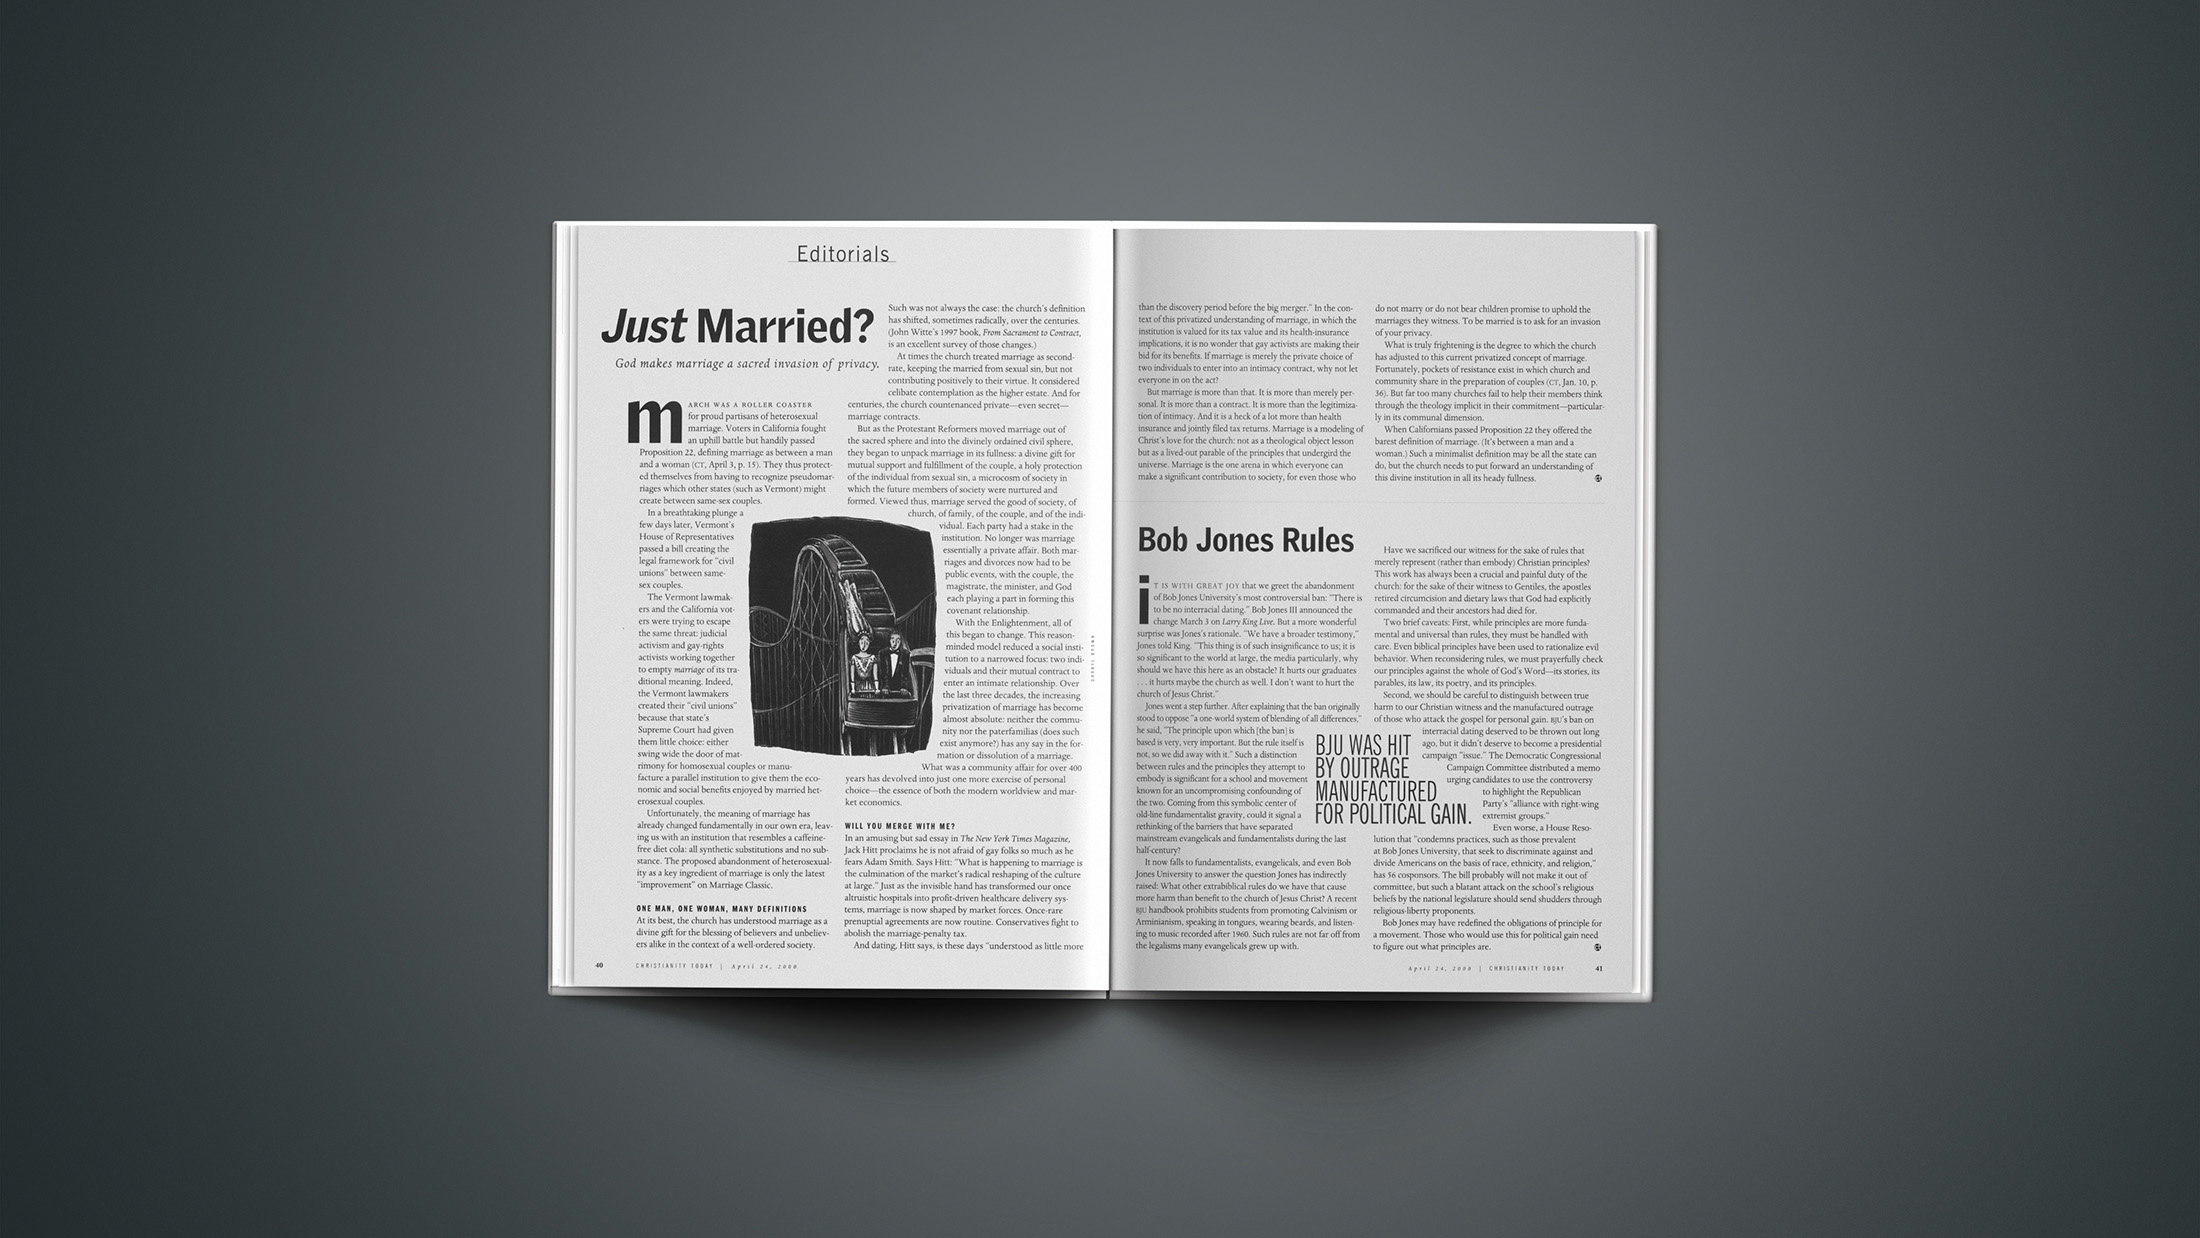 Just Married? Christianity Today image